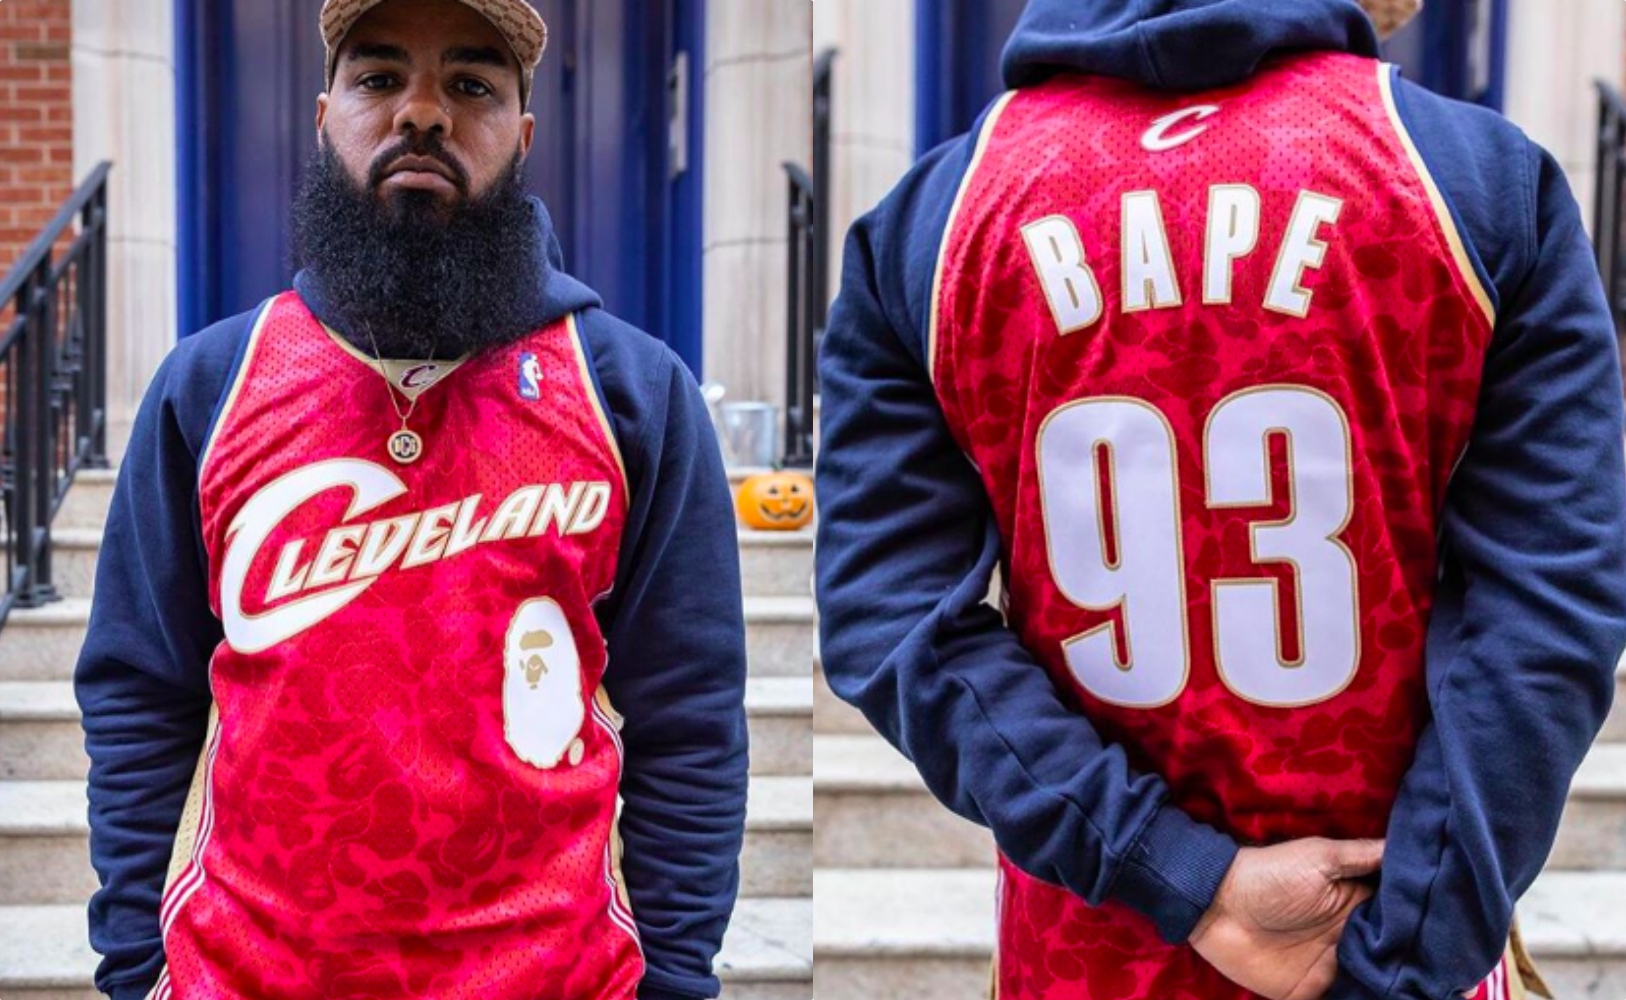 BAPE x Mitchell and Ness x Los Angeles Lakers – Featuring Snoop Dogg